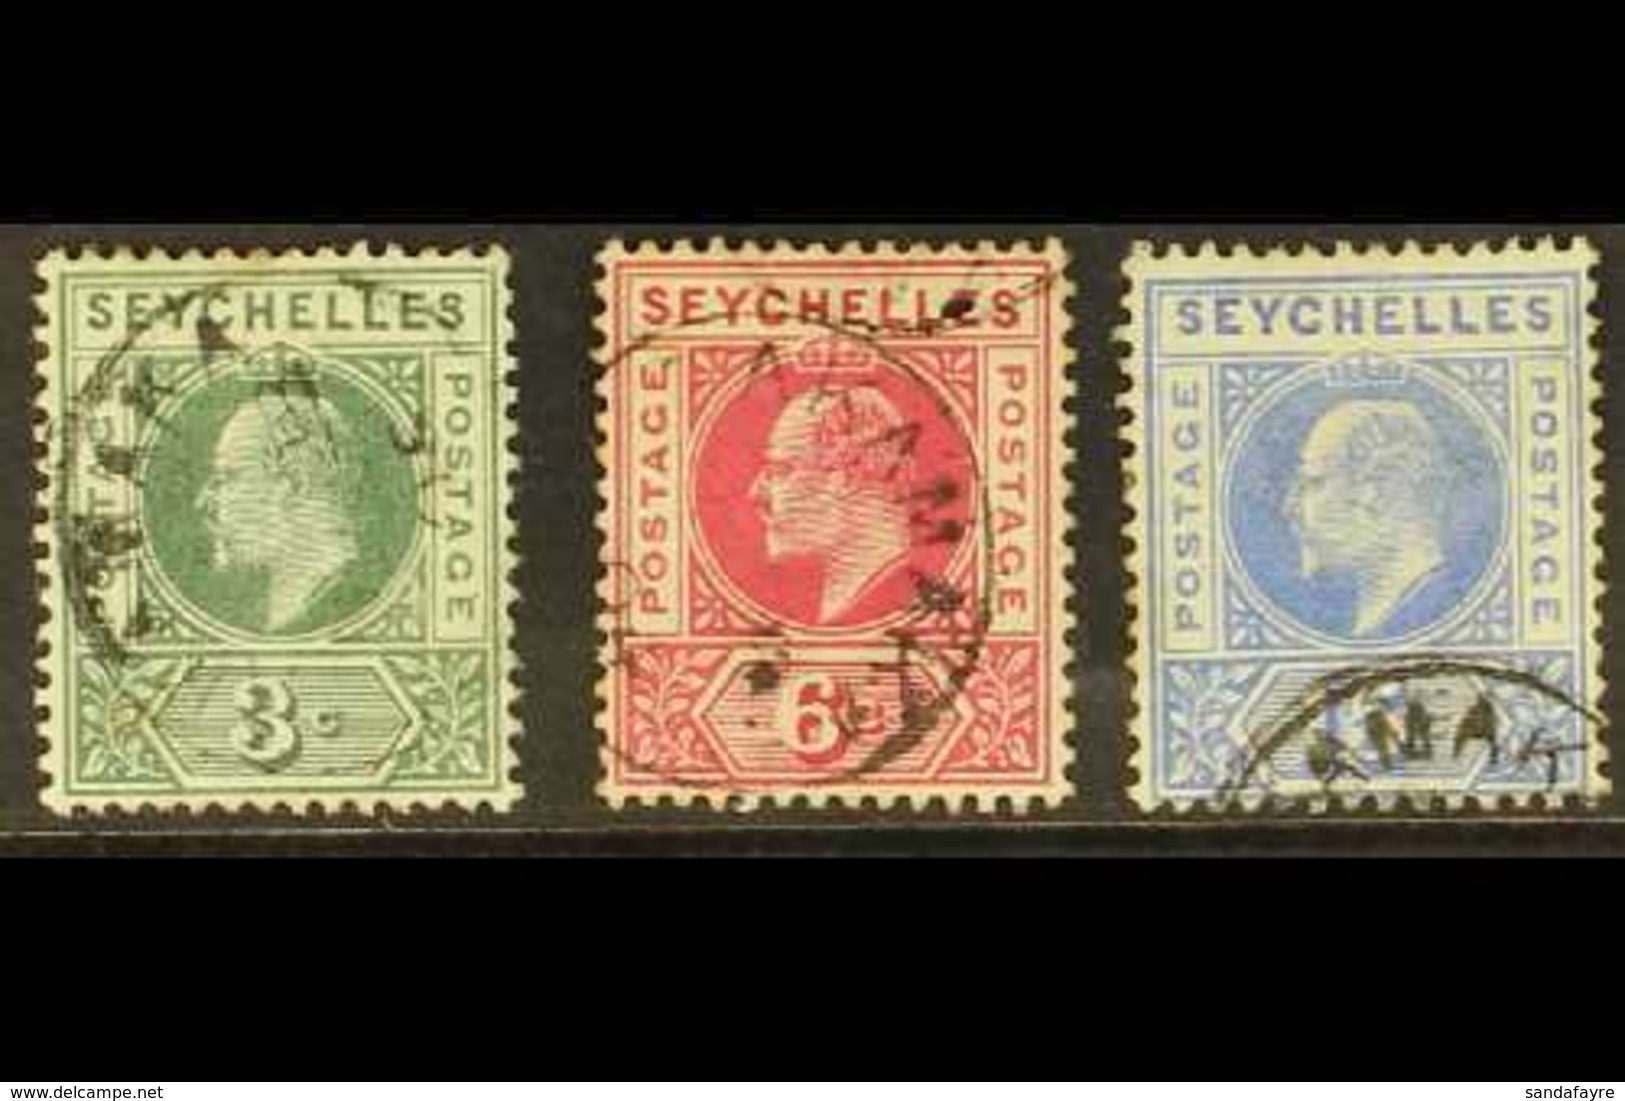 TAKAMAKA 1903 3c, 6c And 15c, SG 47/48, 50, Each With Clear Part Cds, Very Scarce Cancellations. (3 Stamps) For More Ima - Seychellen (...-1976)